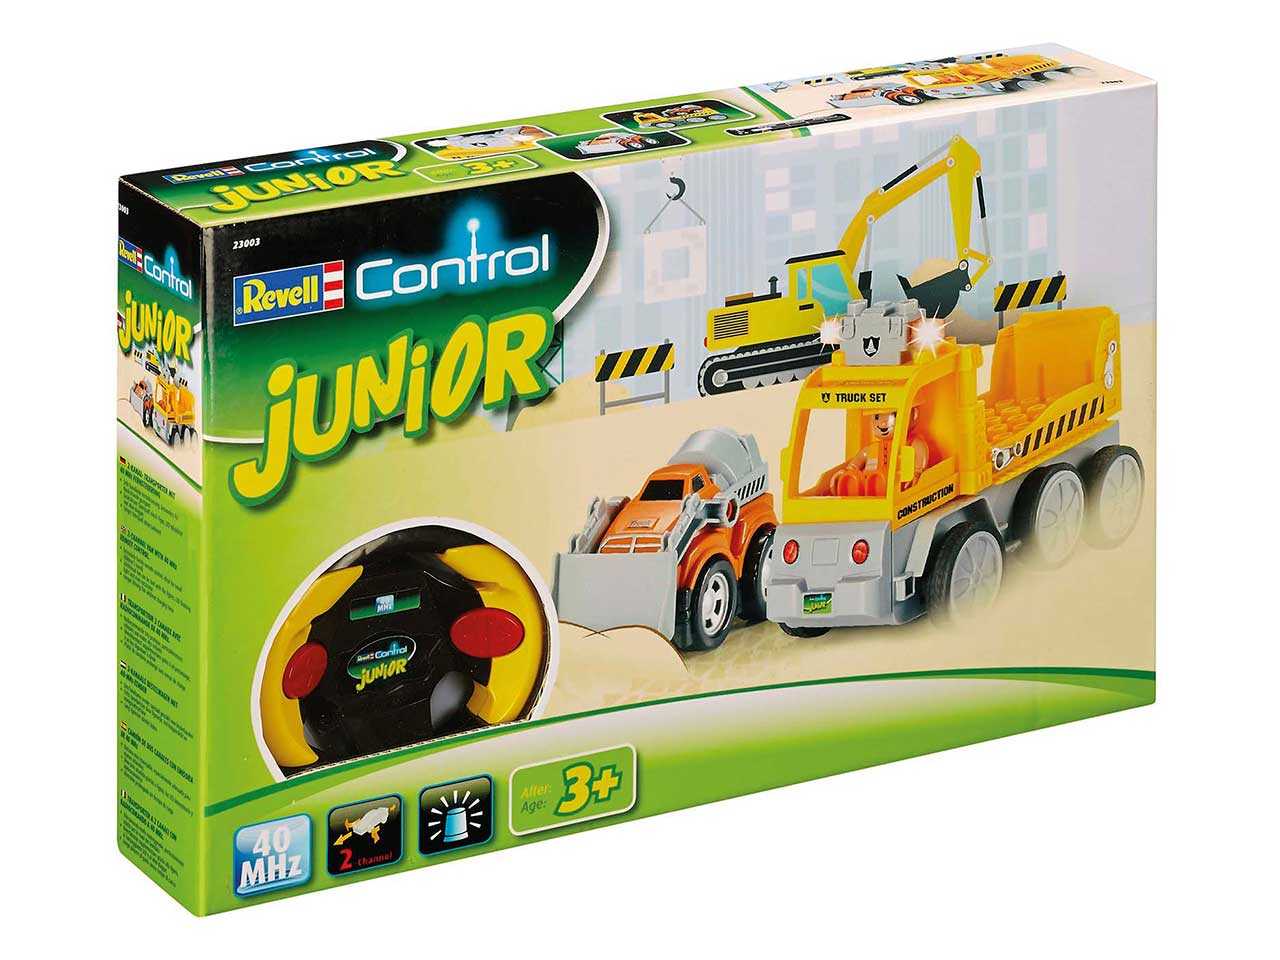 Revell 23003 JUNIOR - Tow Loader with excavator - 40 MHz